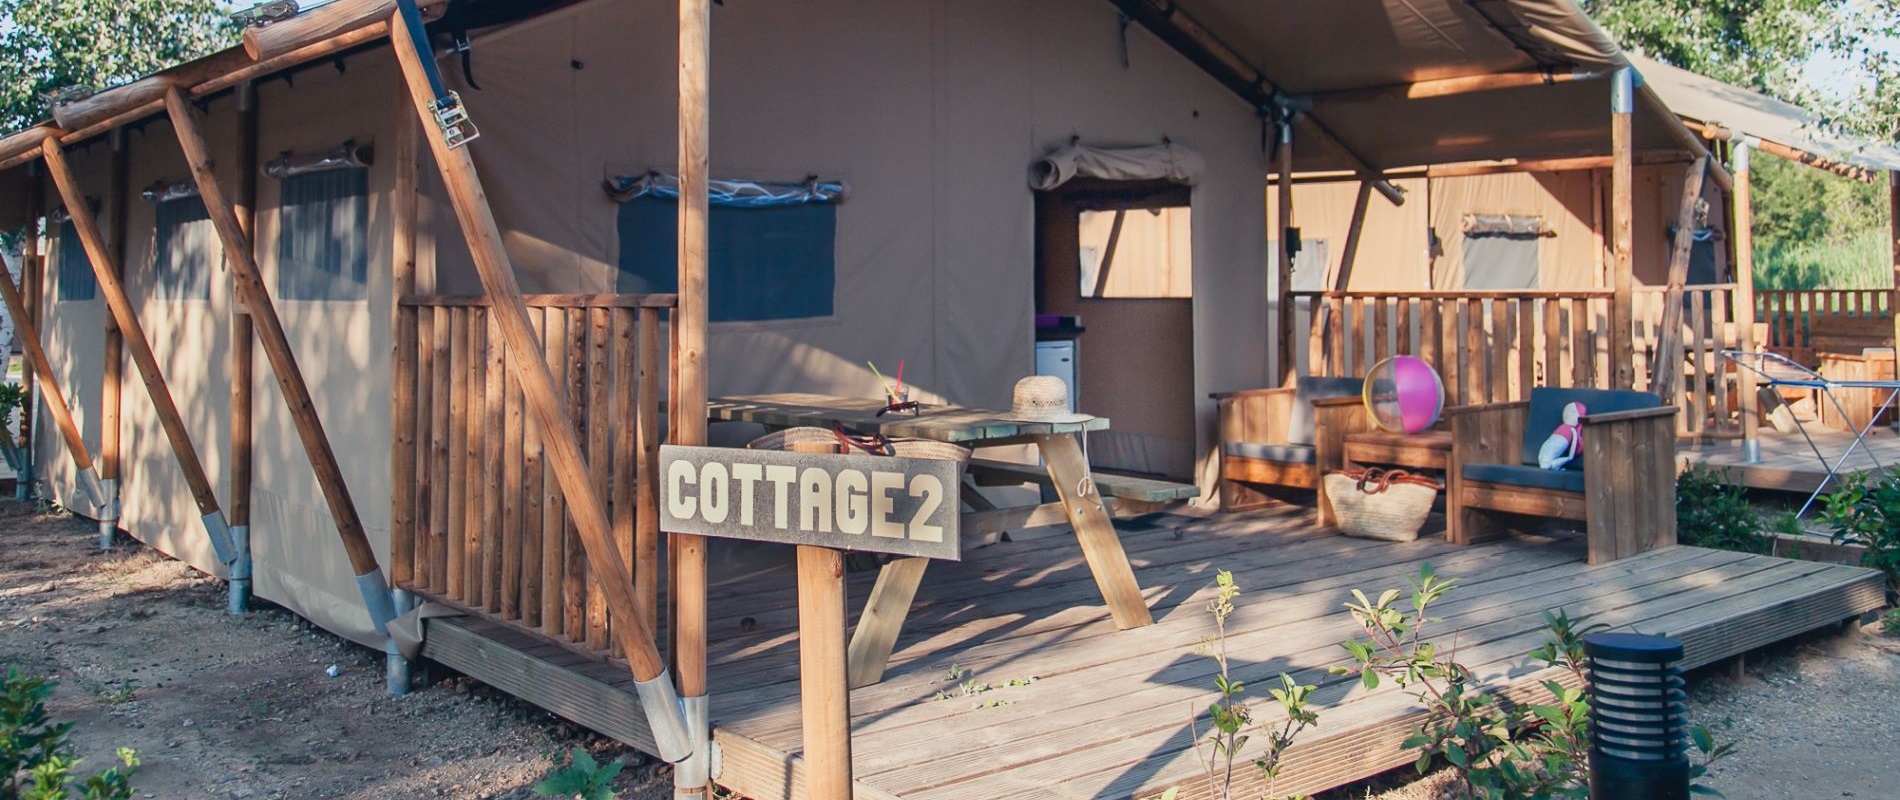 Glamping Cottage